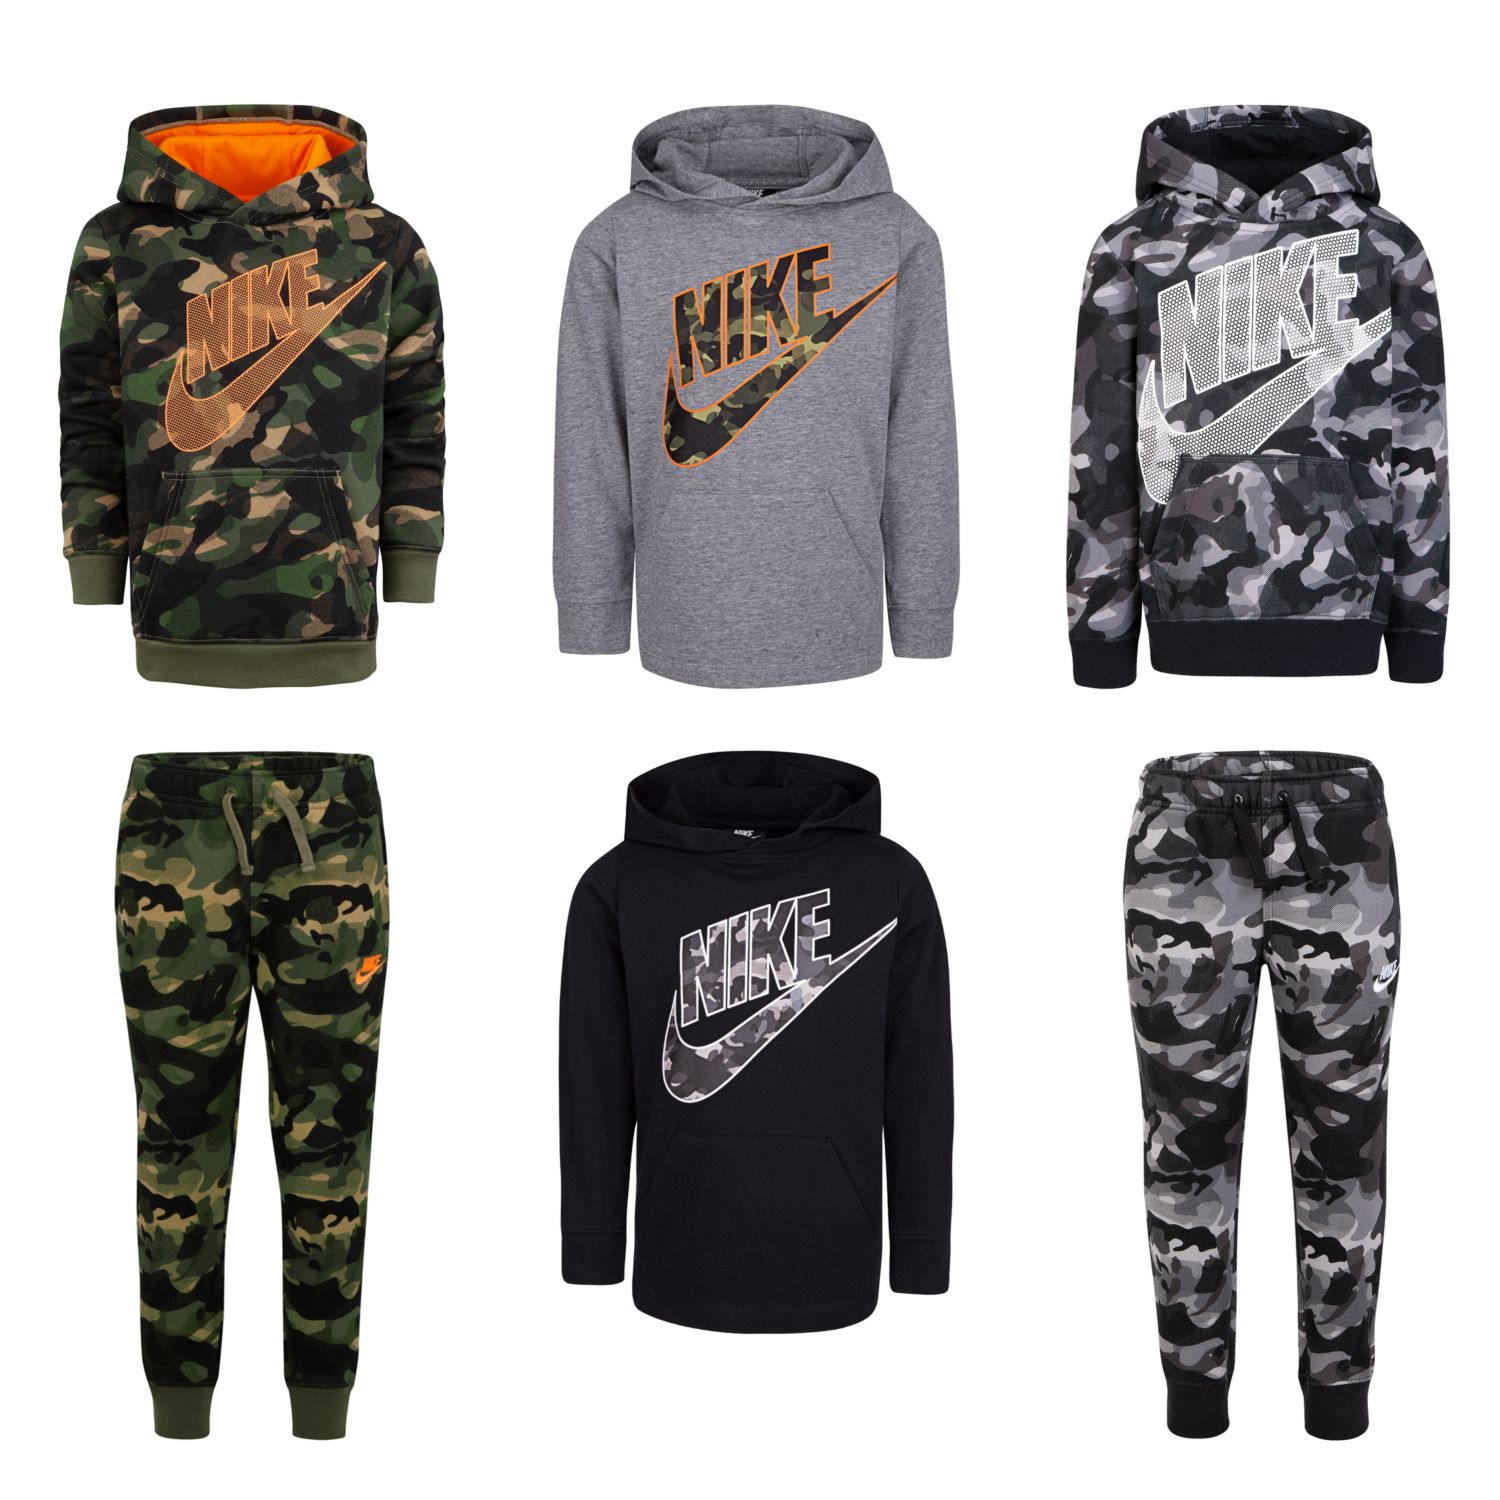 cool nike outfits